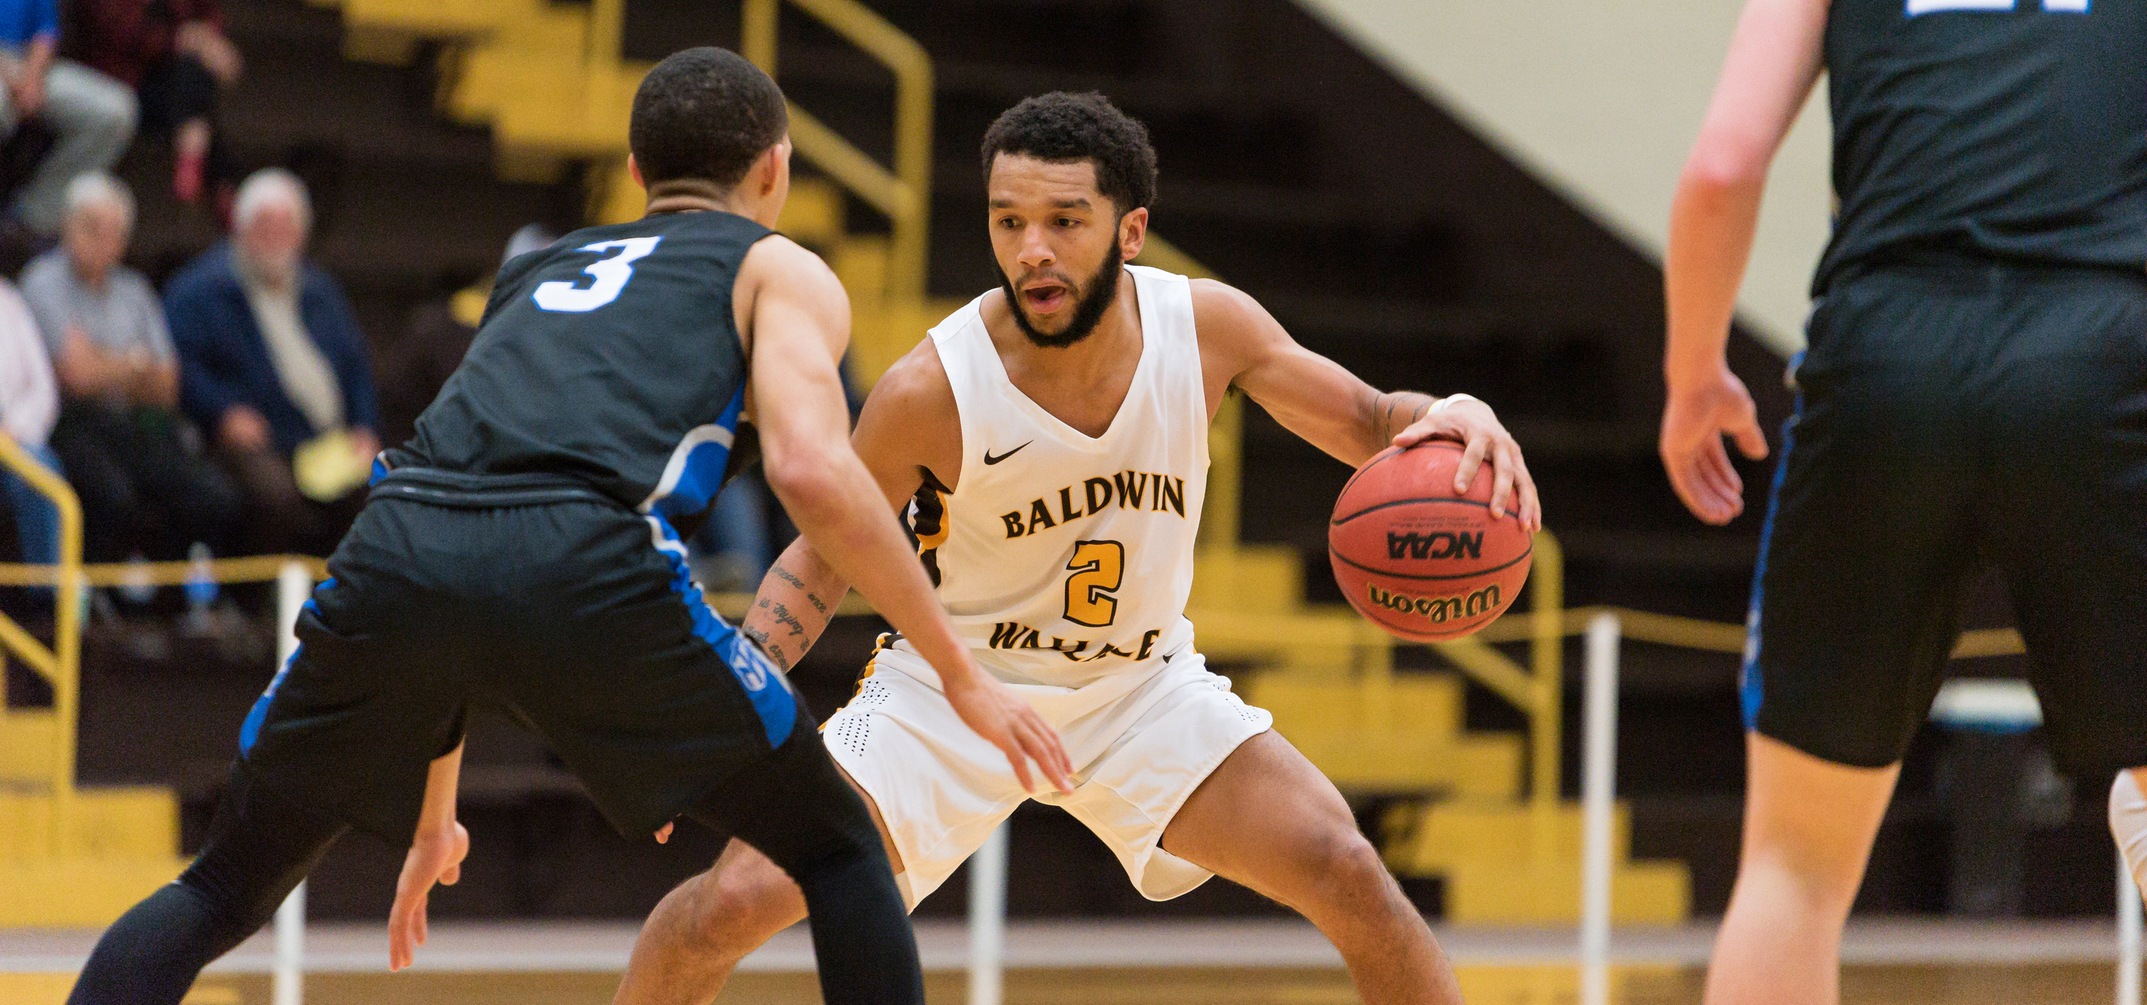 Senior Jay Battle scored a game-high 19 points in the victory over Heidelberg (Photo Courtesy of Jesse Kucewicz)